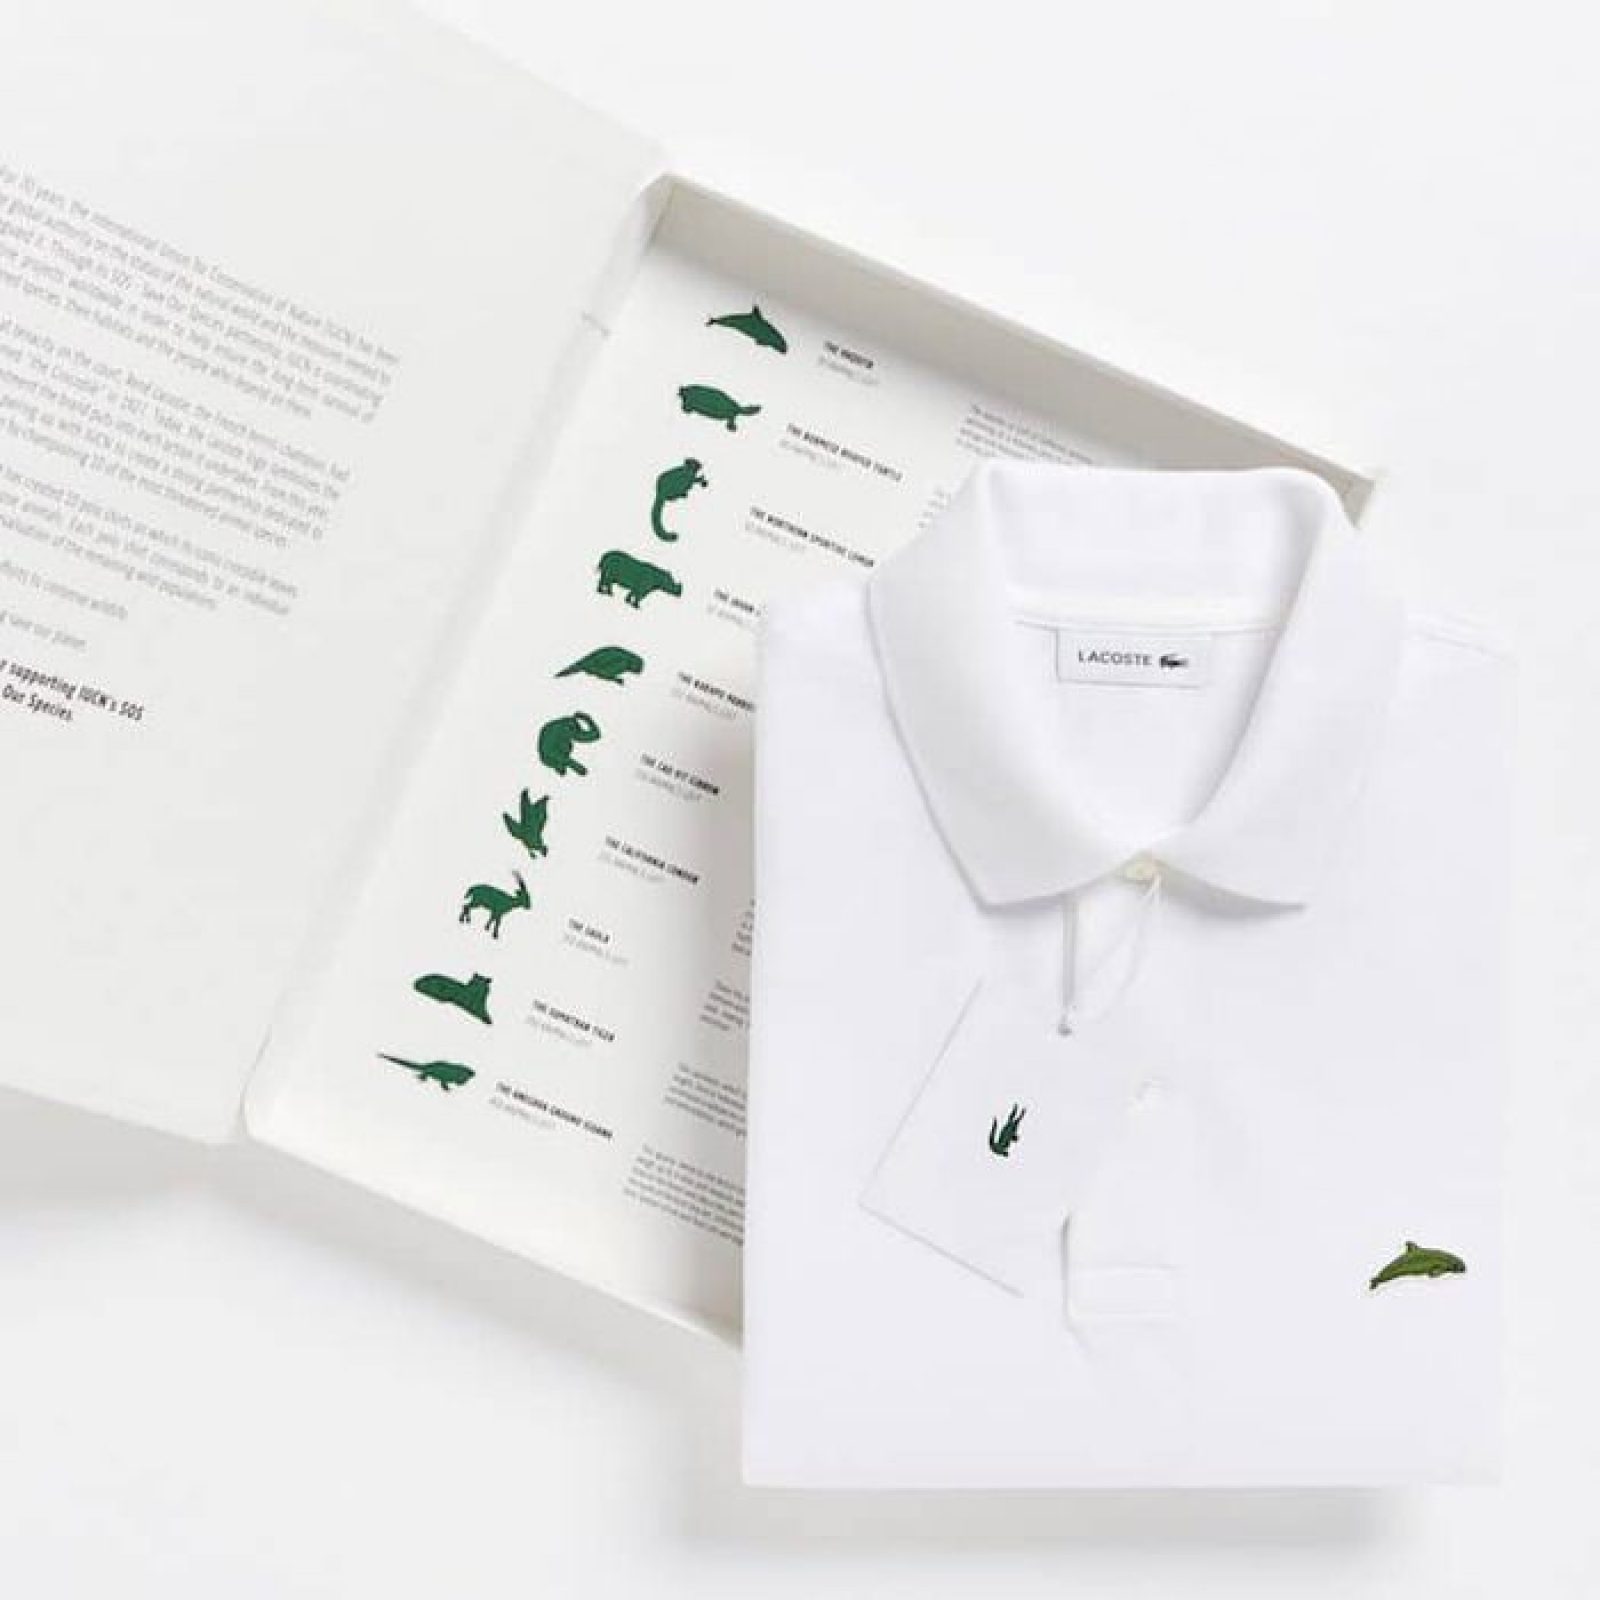 lacoste new shirts